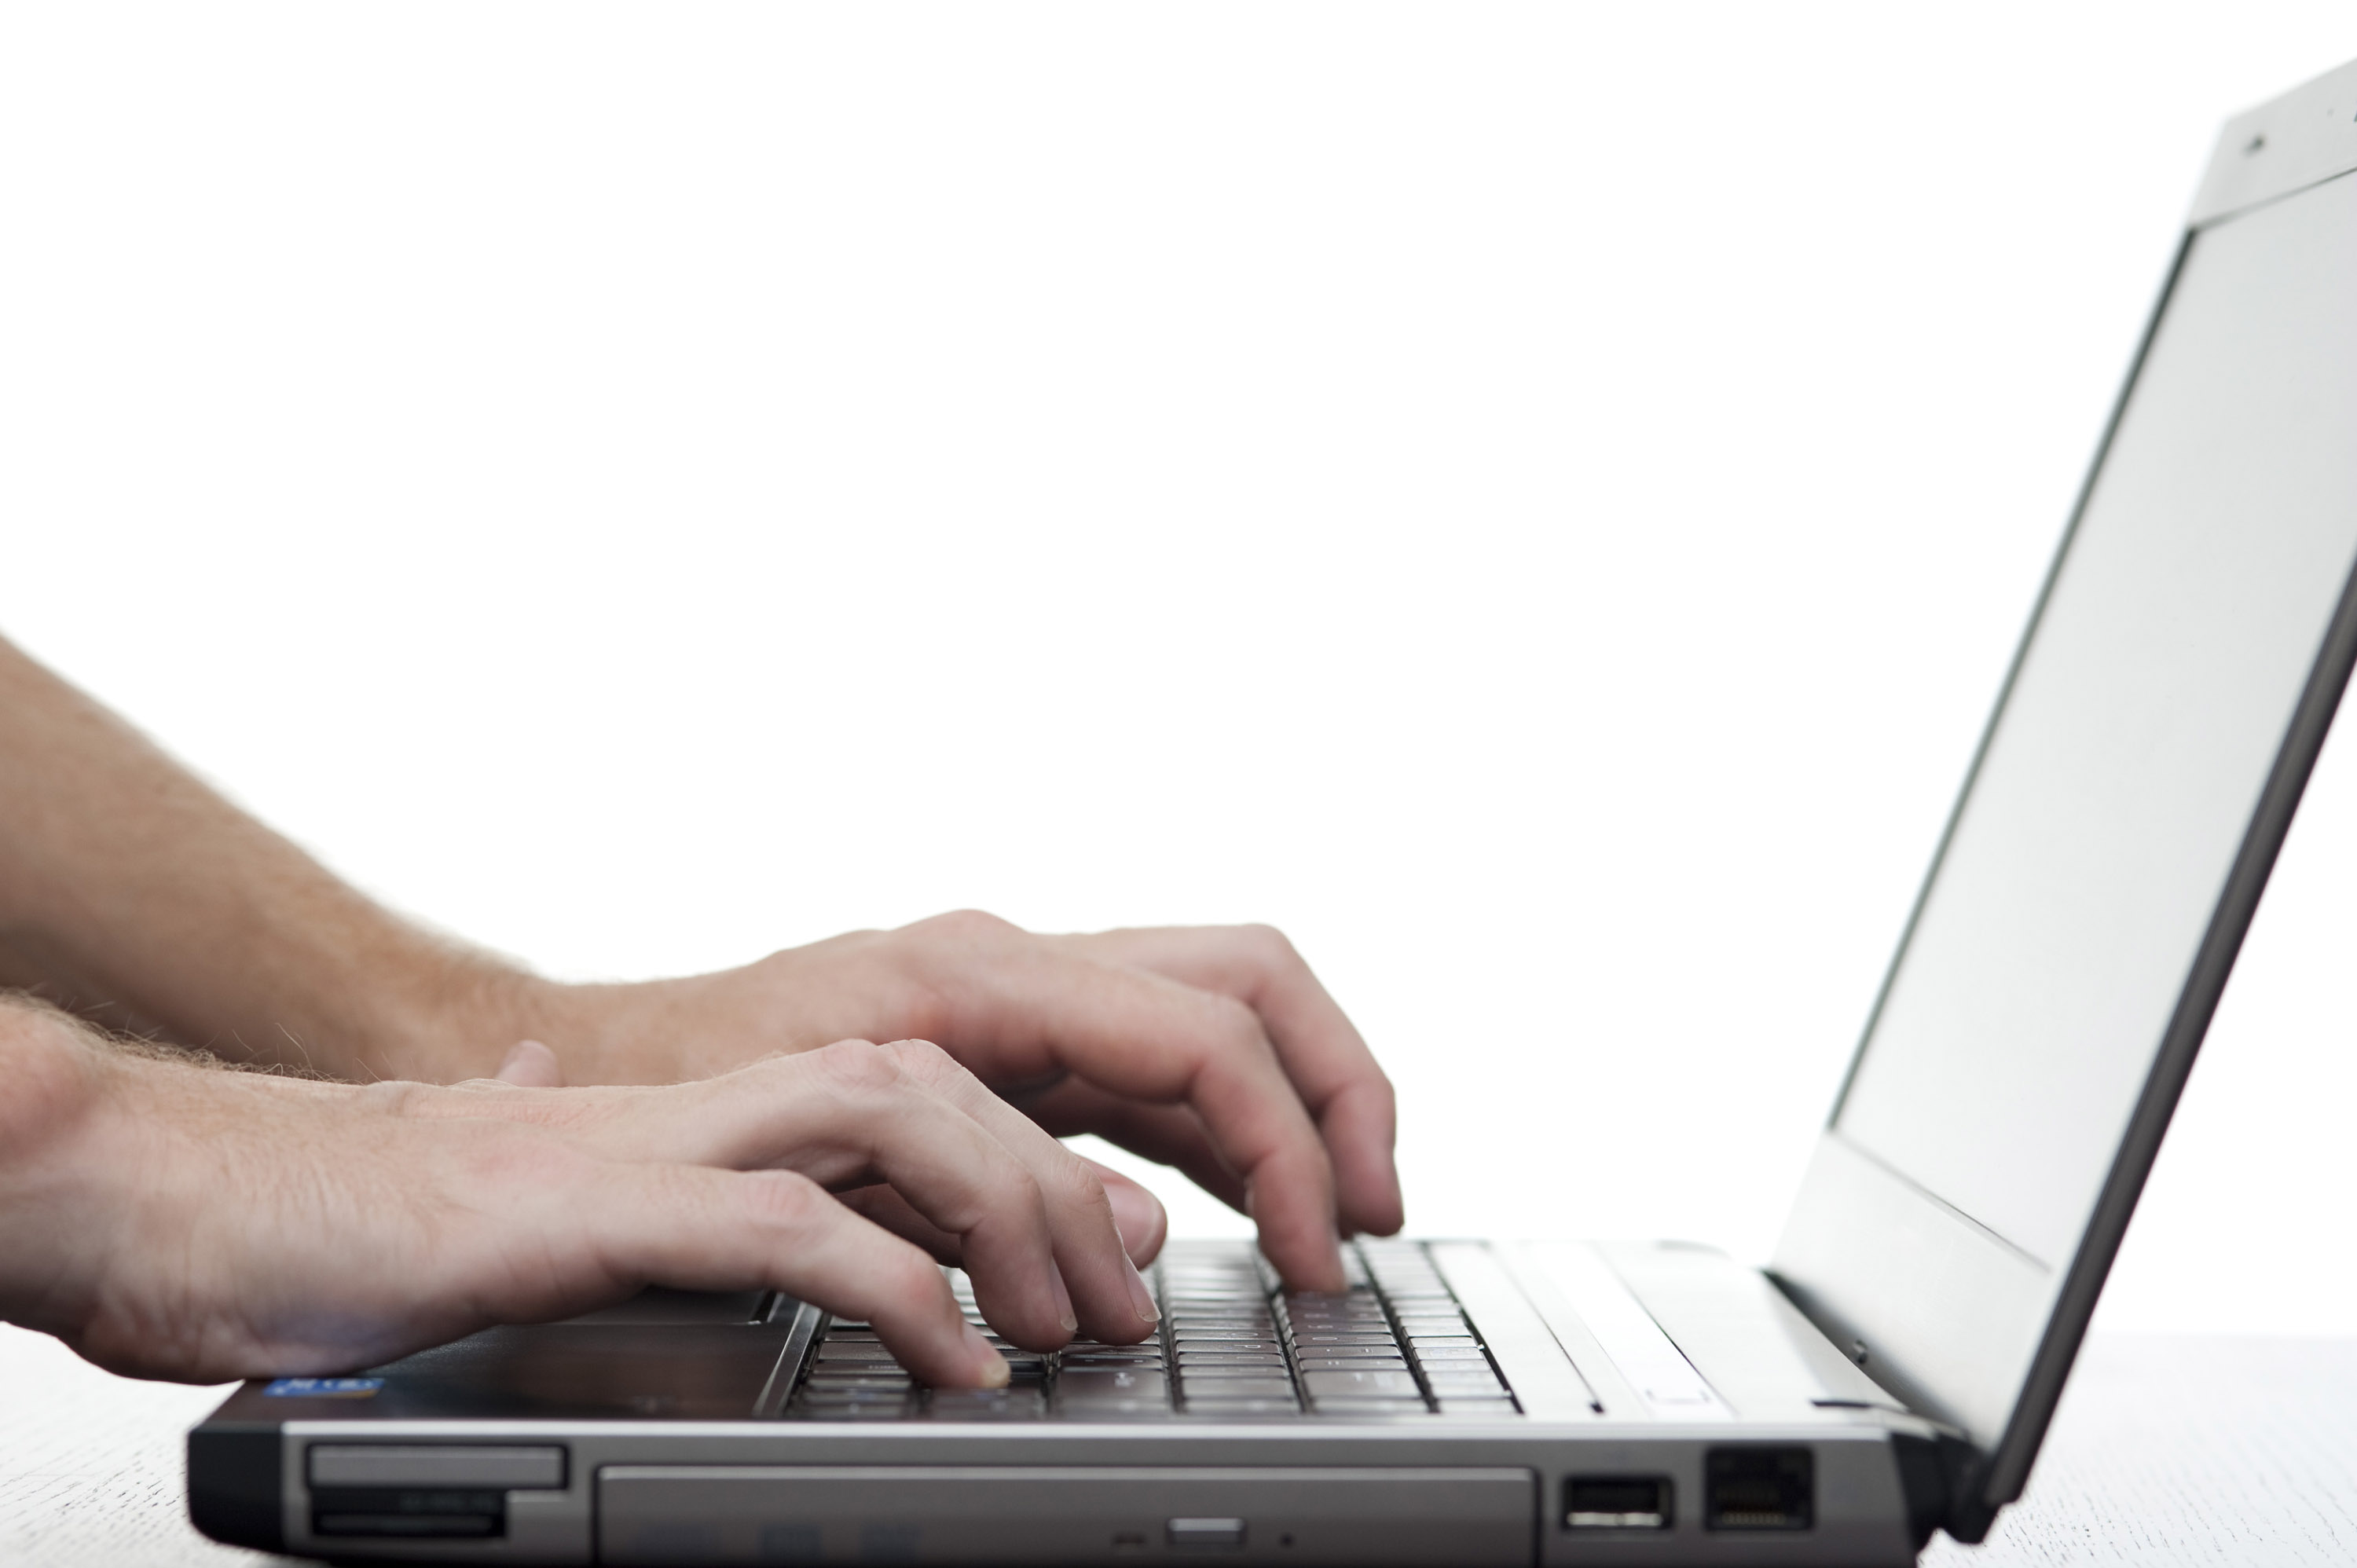 hands typing on a laptop keyboard with lots of copy space on a white background